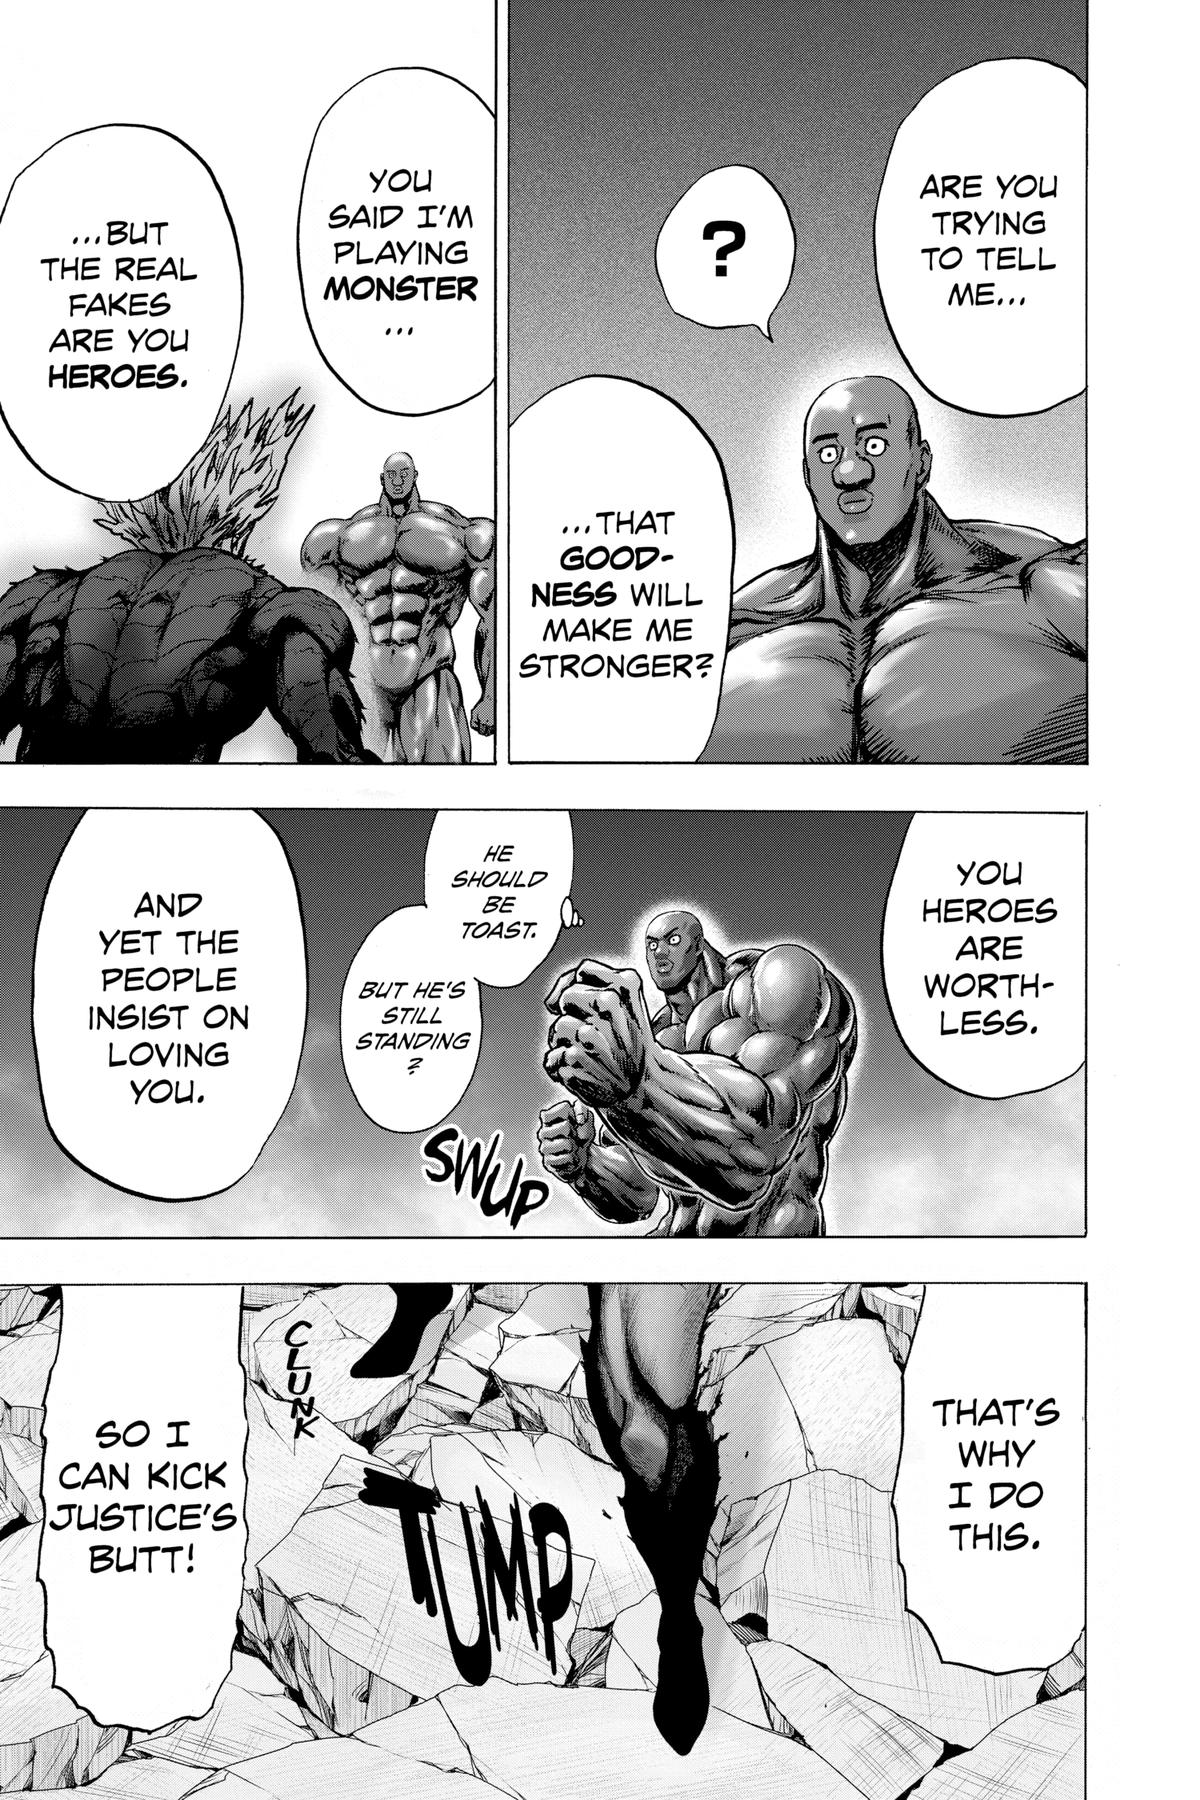 One-Punch Man, Punch 130 image 23